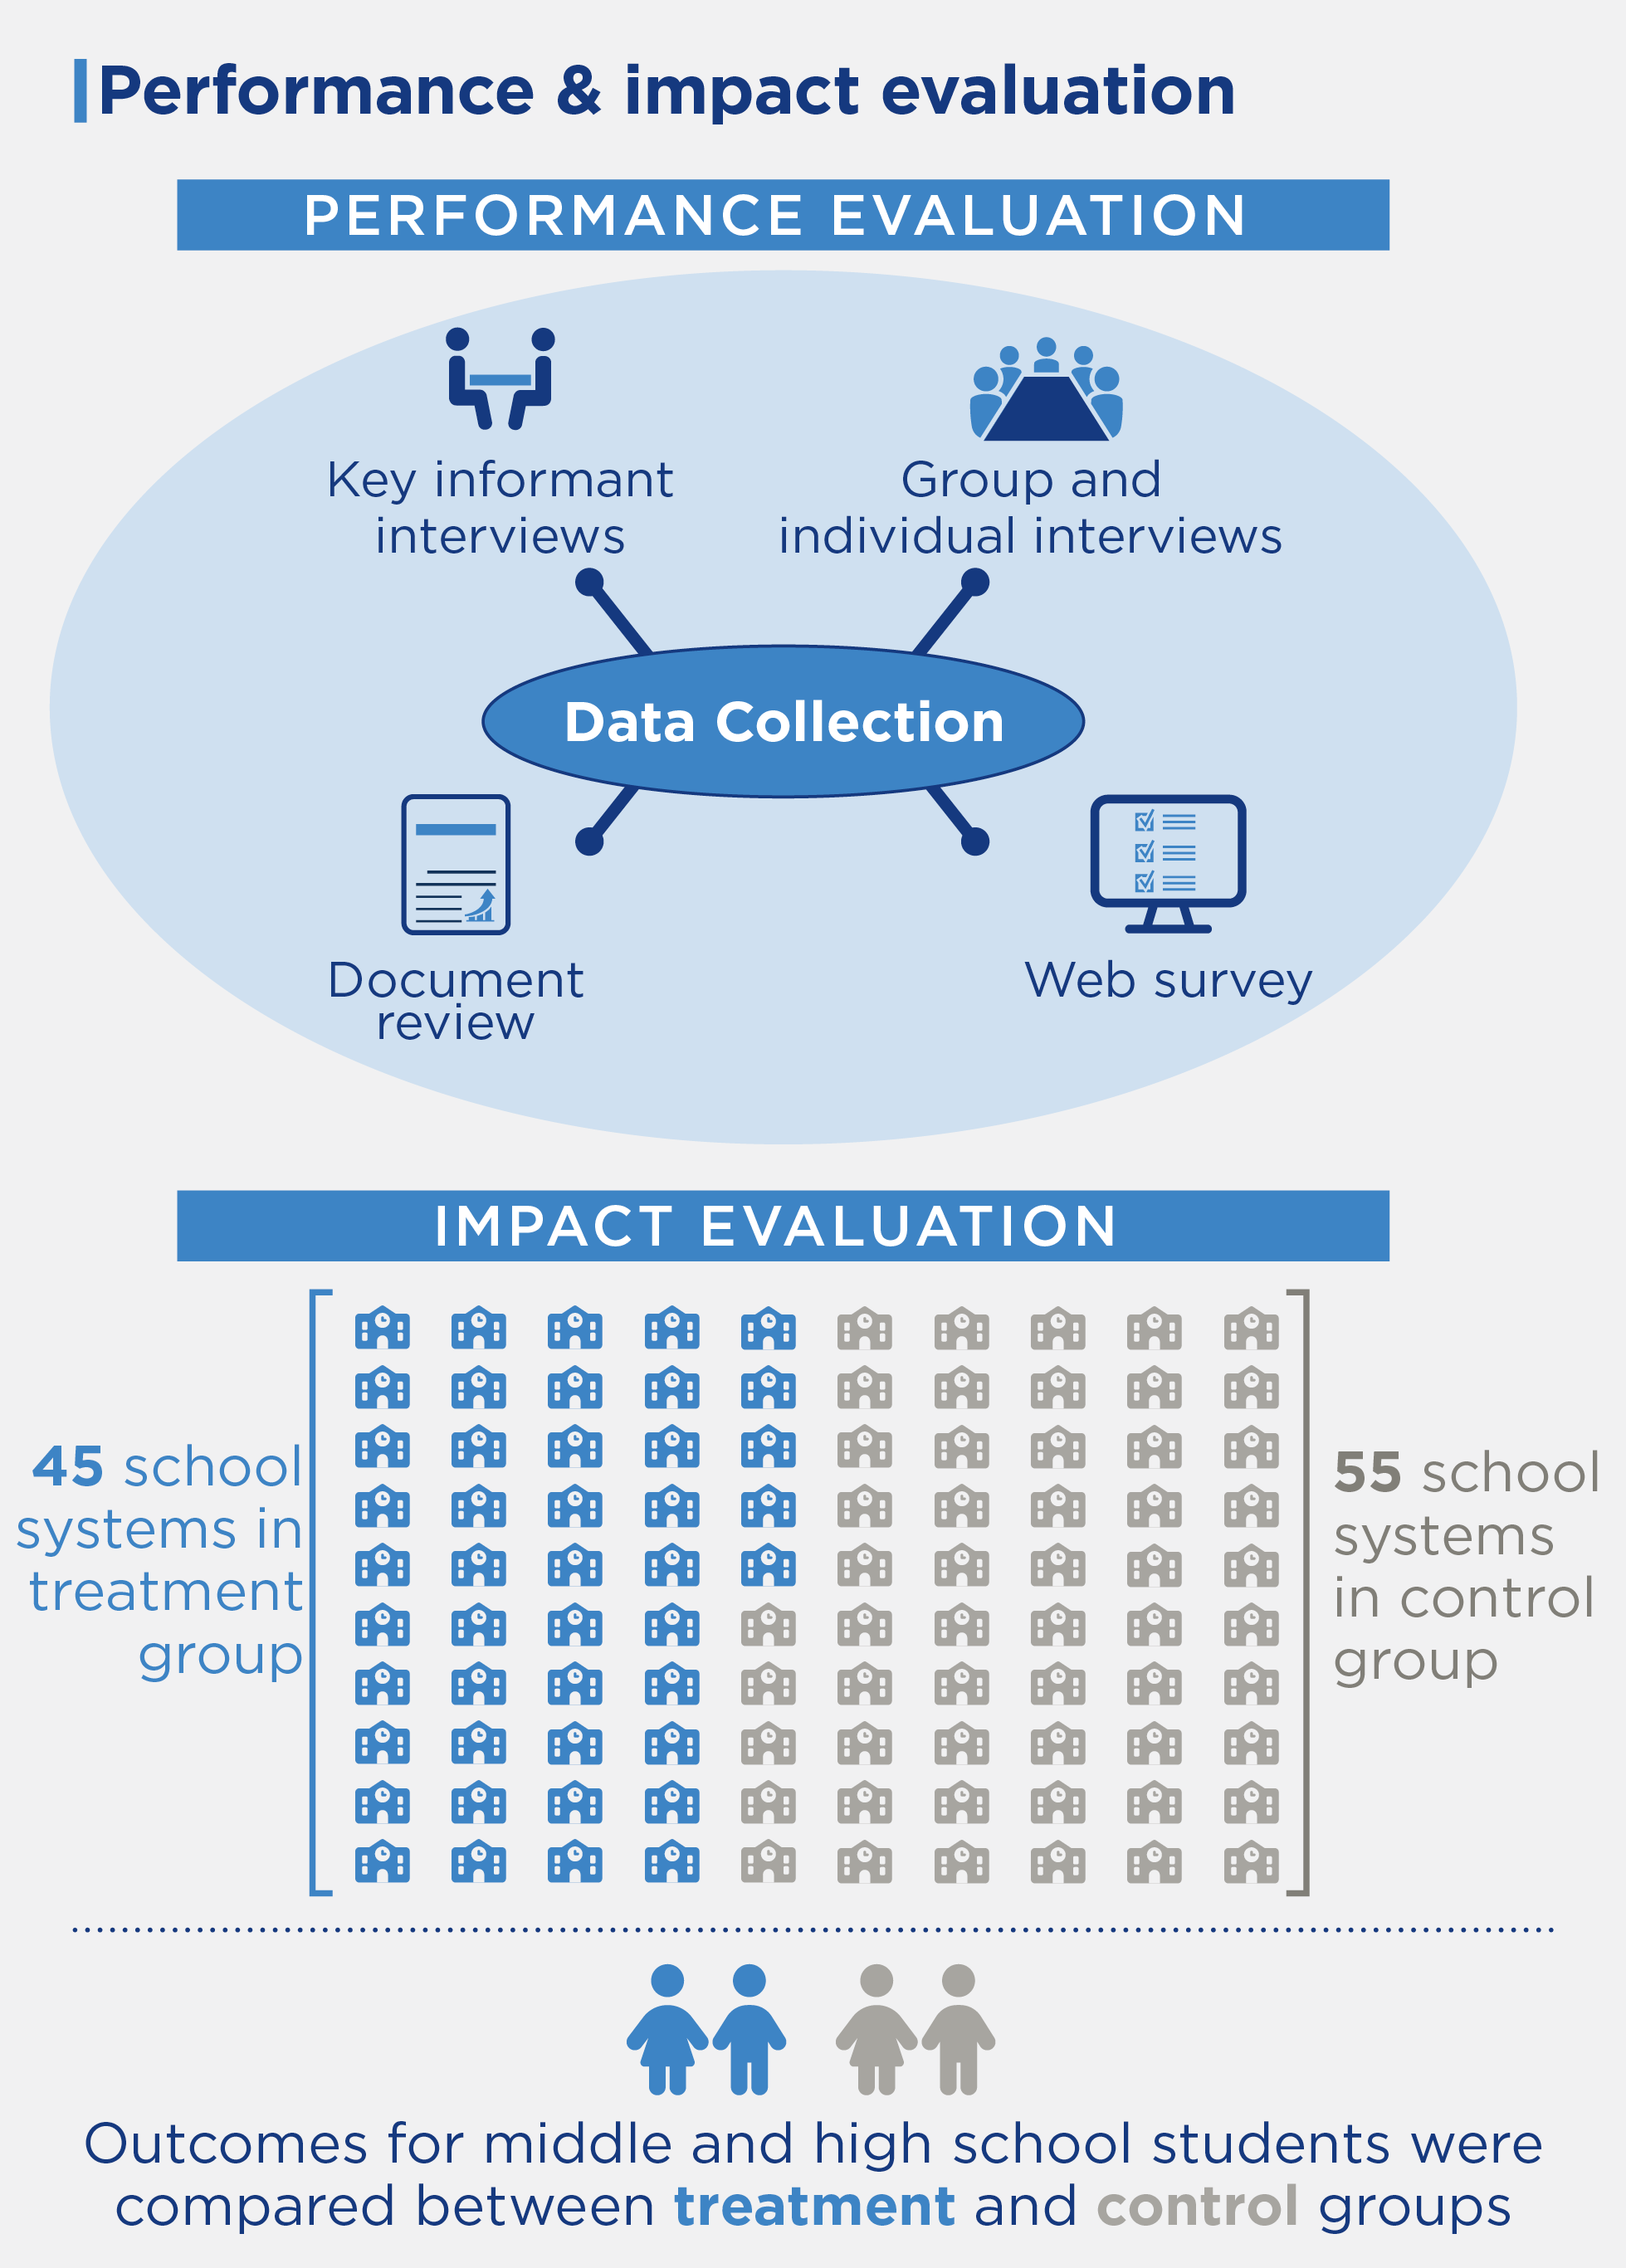 The performance evaluation used data collected from key informant interviews, group and individual interviews, document reviews and a web survey. The impact evaluation selected 45 school systems for the treatment group, and 55 for the control group. Outcomes for middle and high school students were compared between treatment and control groups.